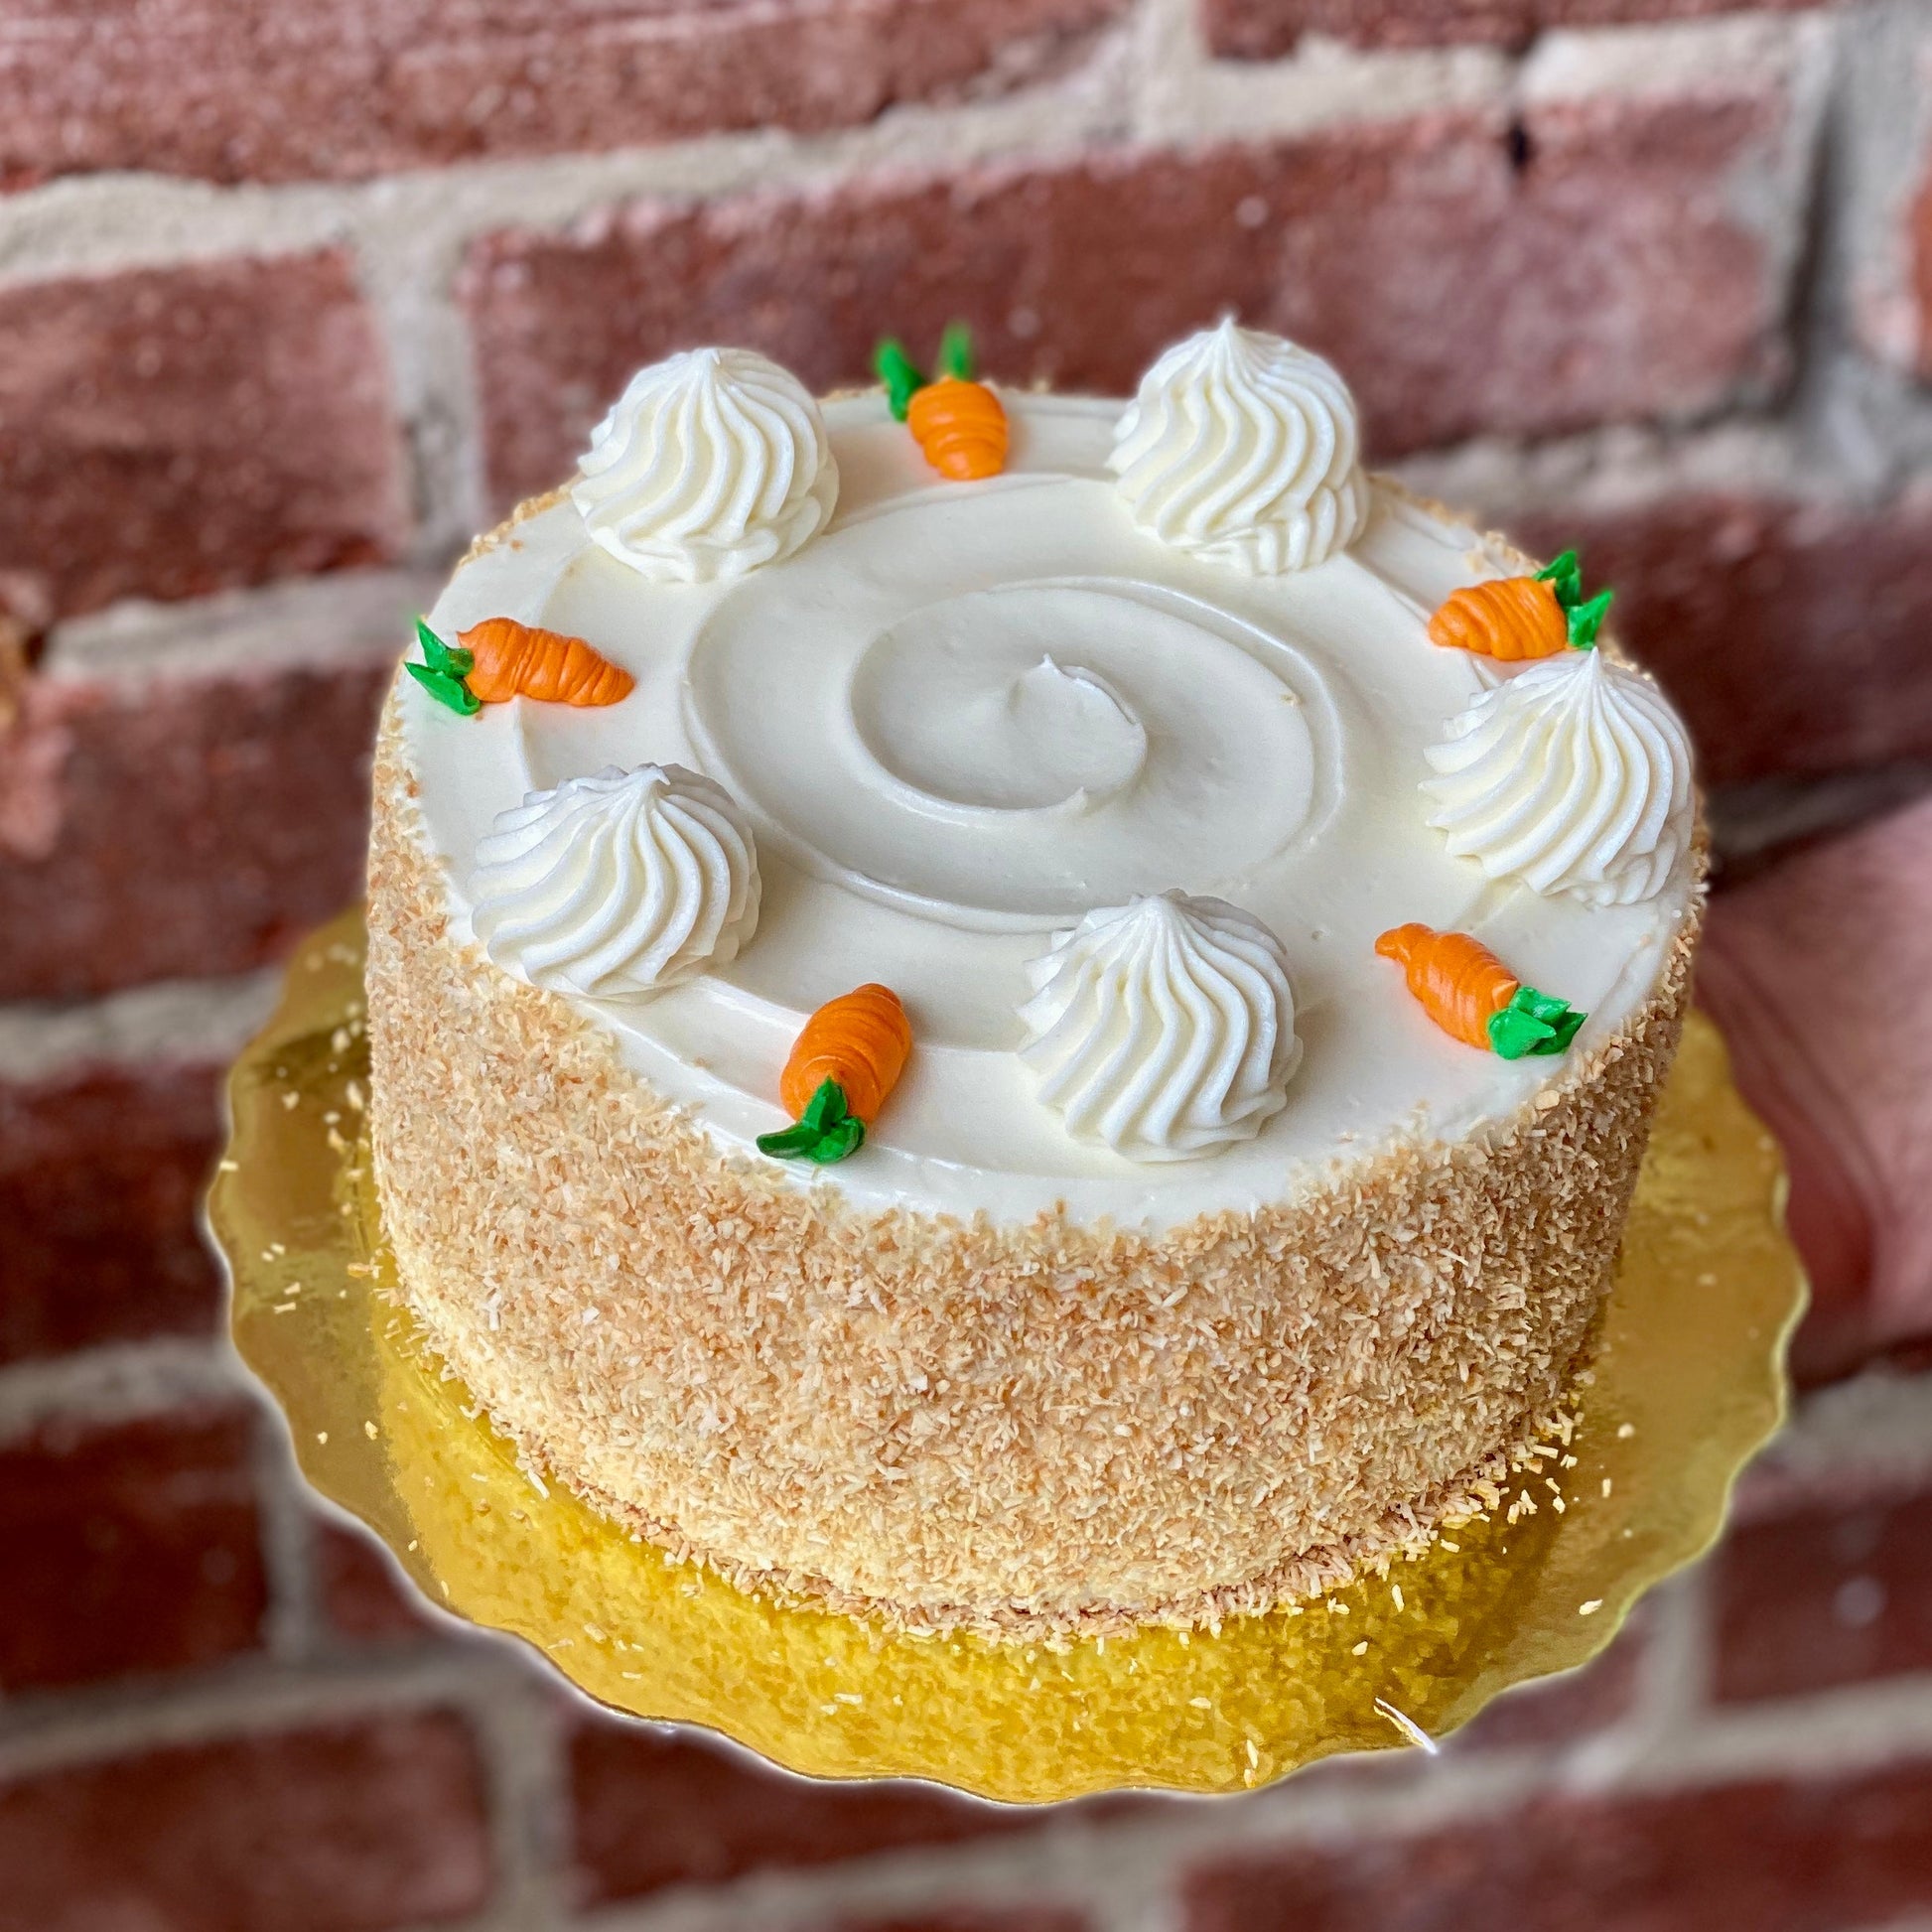 White cake with tiny carrot designs